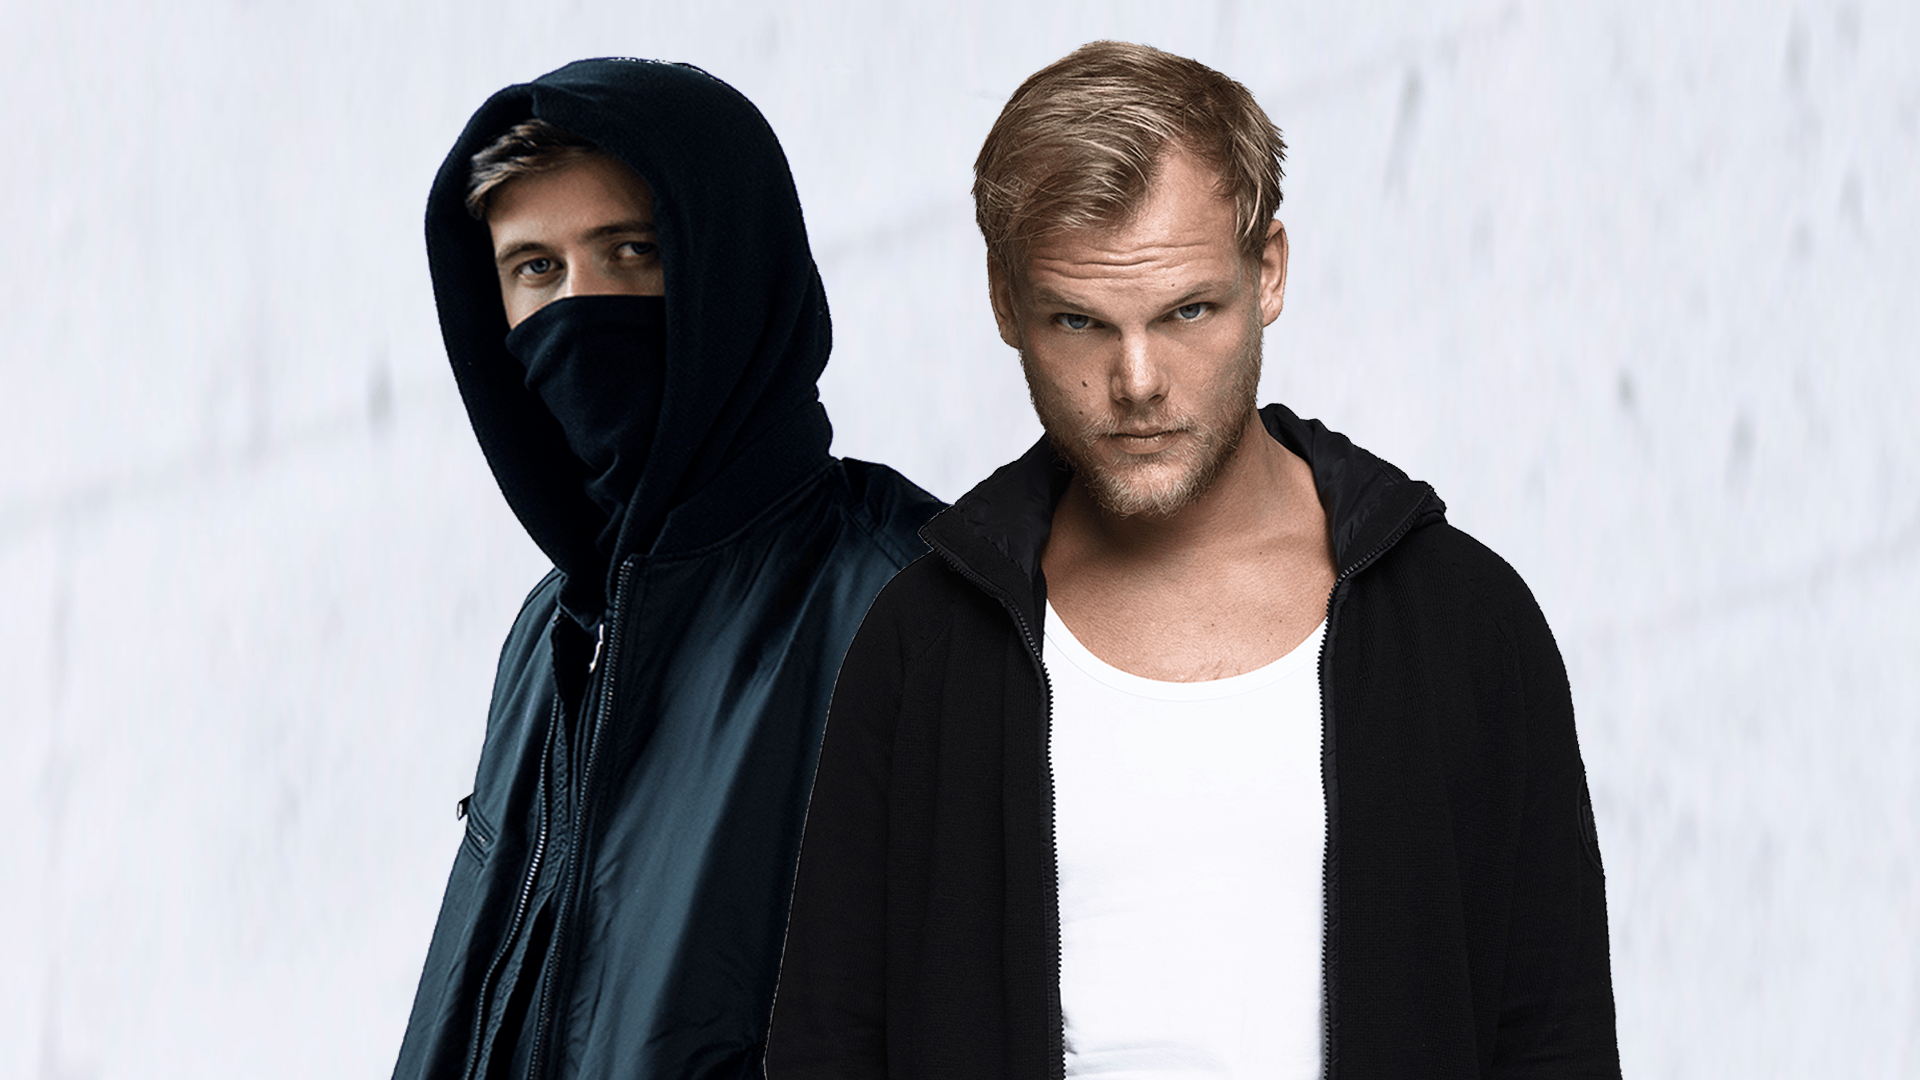 Alan Walker releases his own remix for Avicii's “Lonely Together”